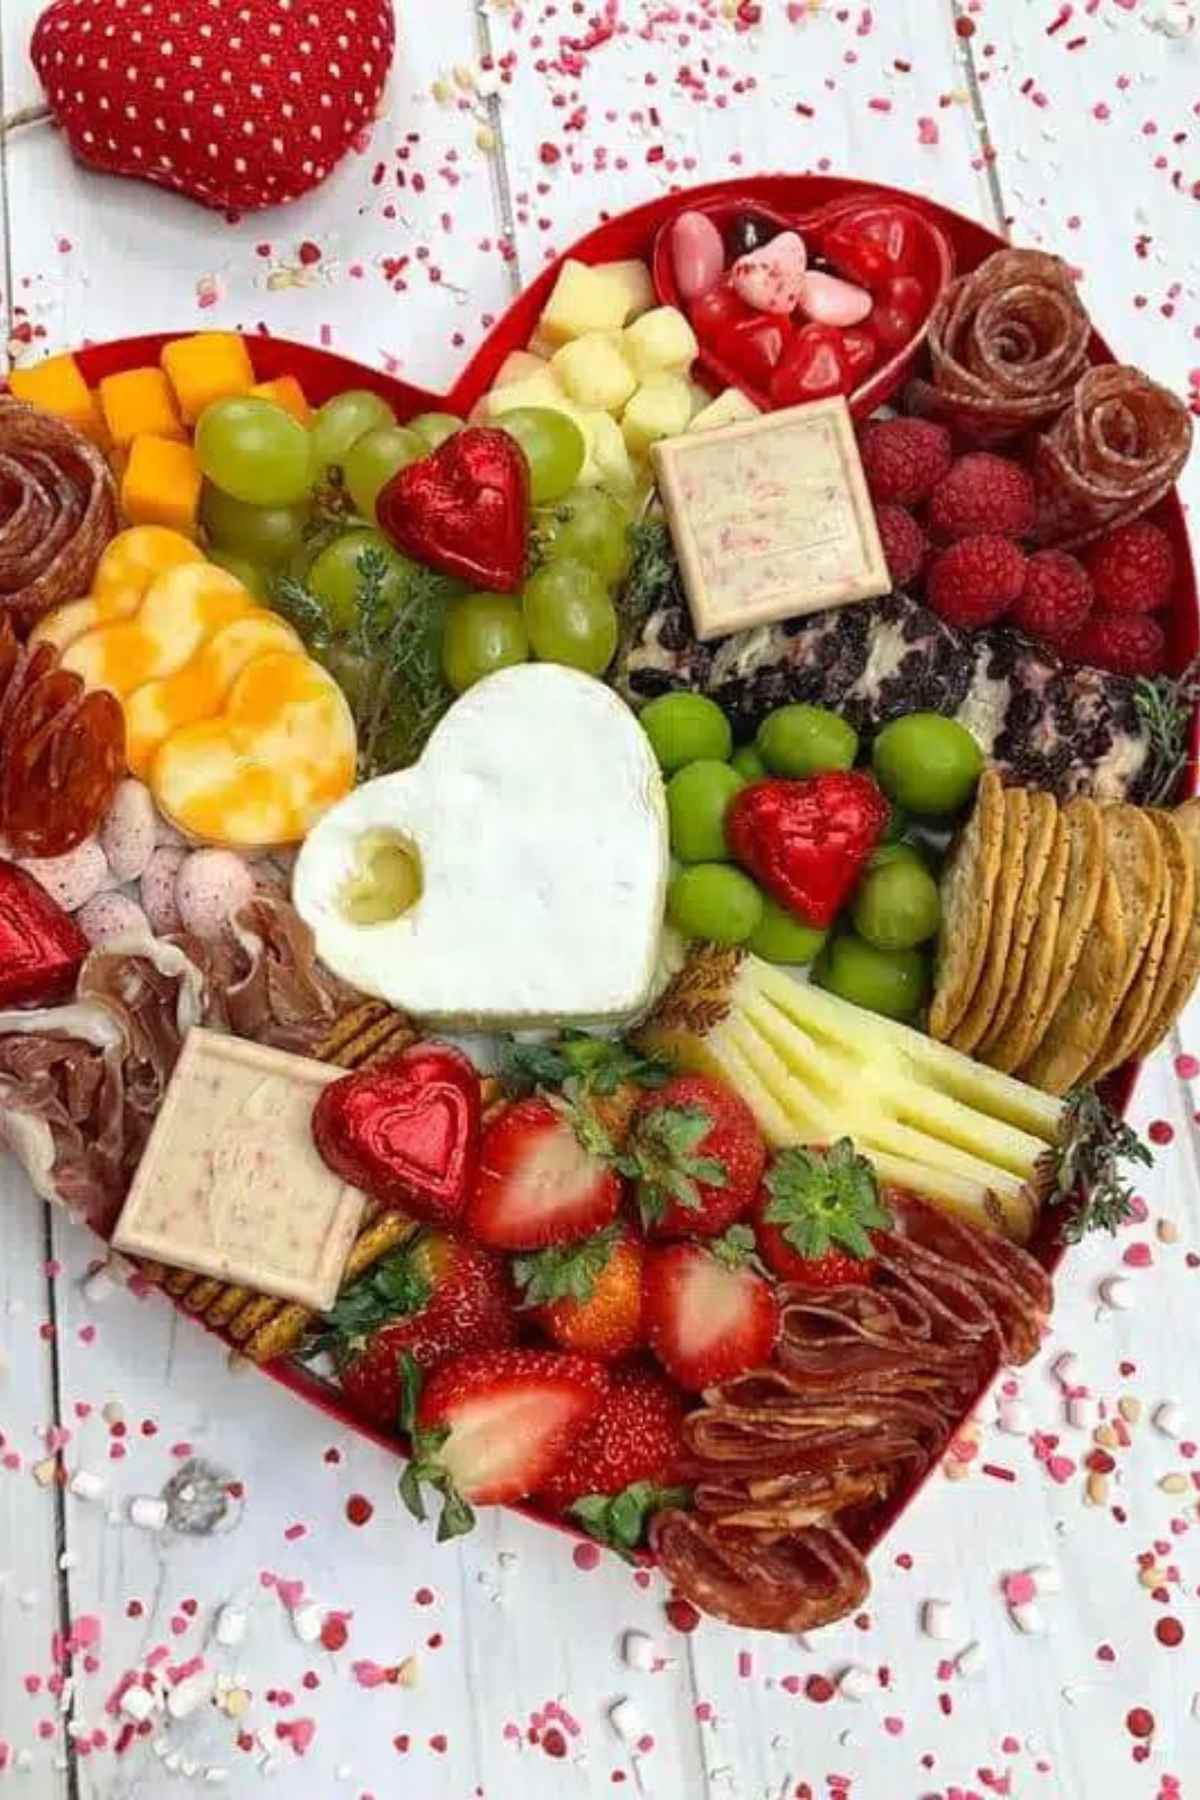 Heart shaped charcuterie board with fruit, cheese and crackers.